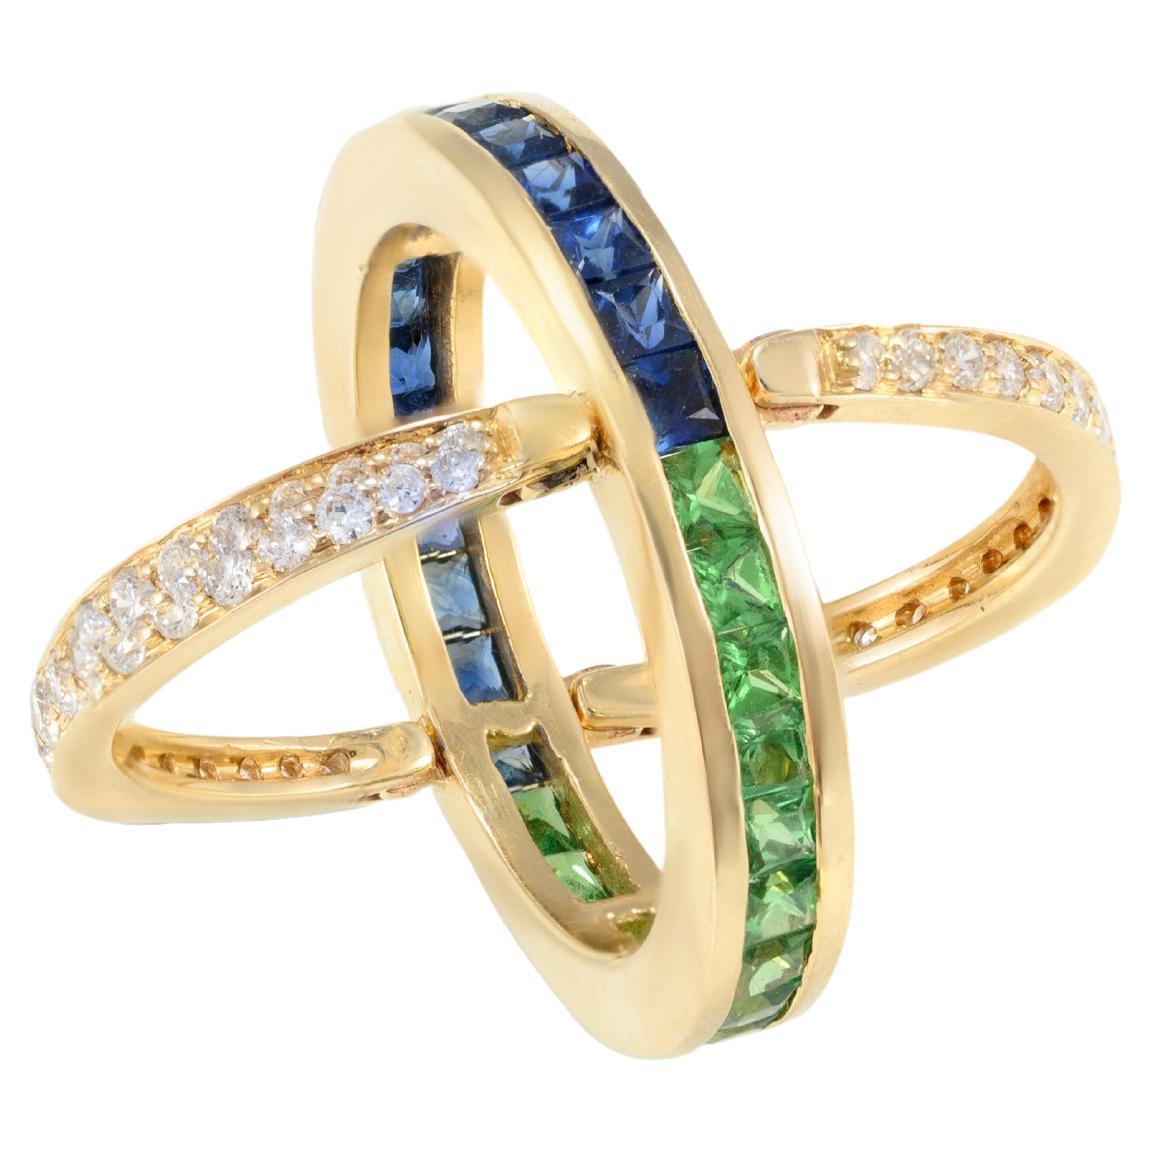 For Sale:  Unique 14k Yellow Gold Emerald and Sapphire Reversible Ring with Diamonds